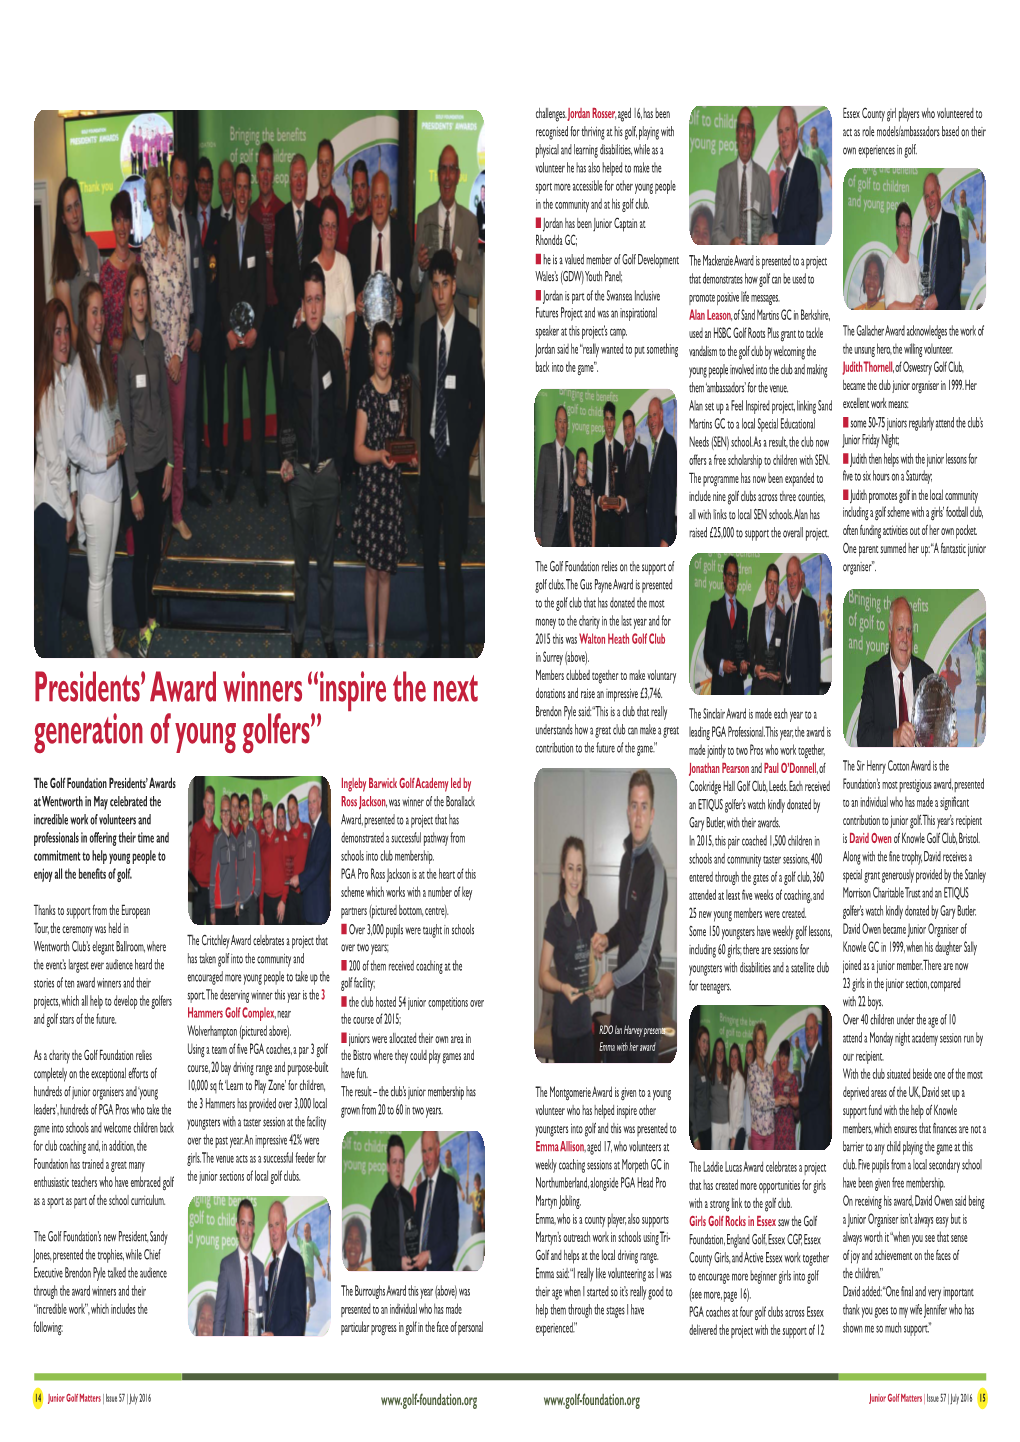 Presidents' Award Winners “Inspire the Next Generation of Young Golfers”